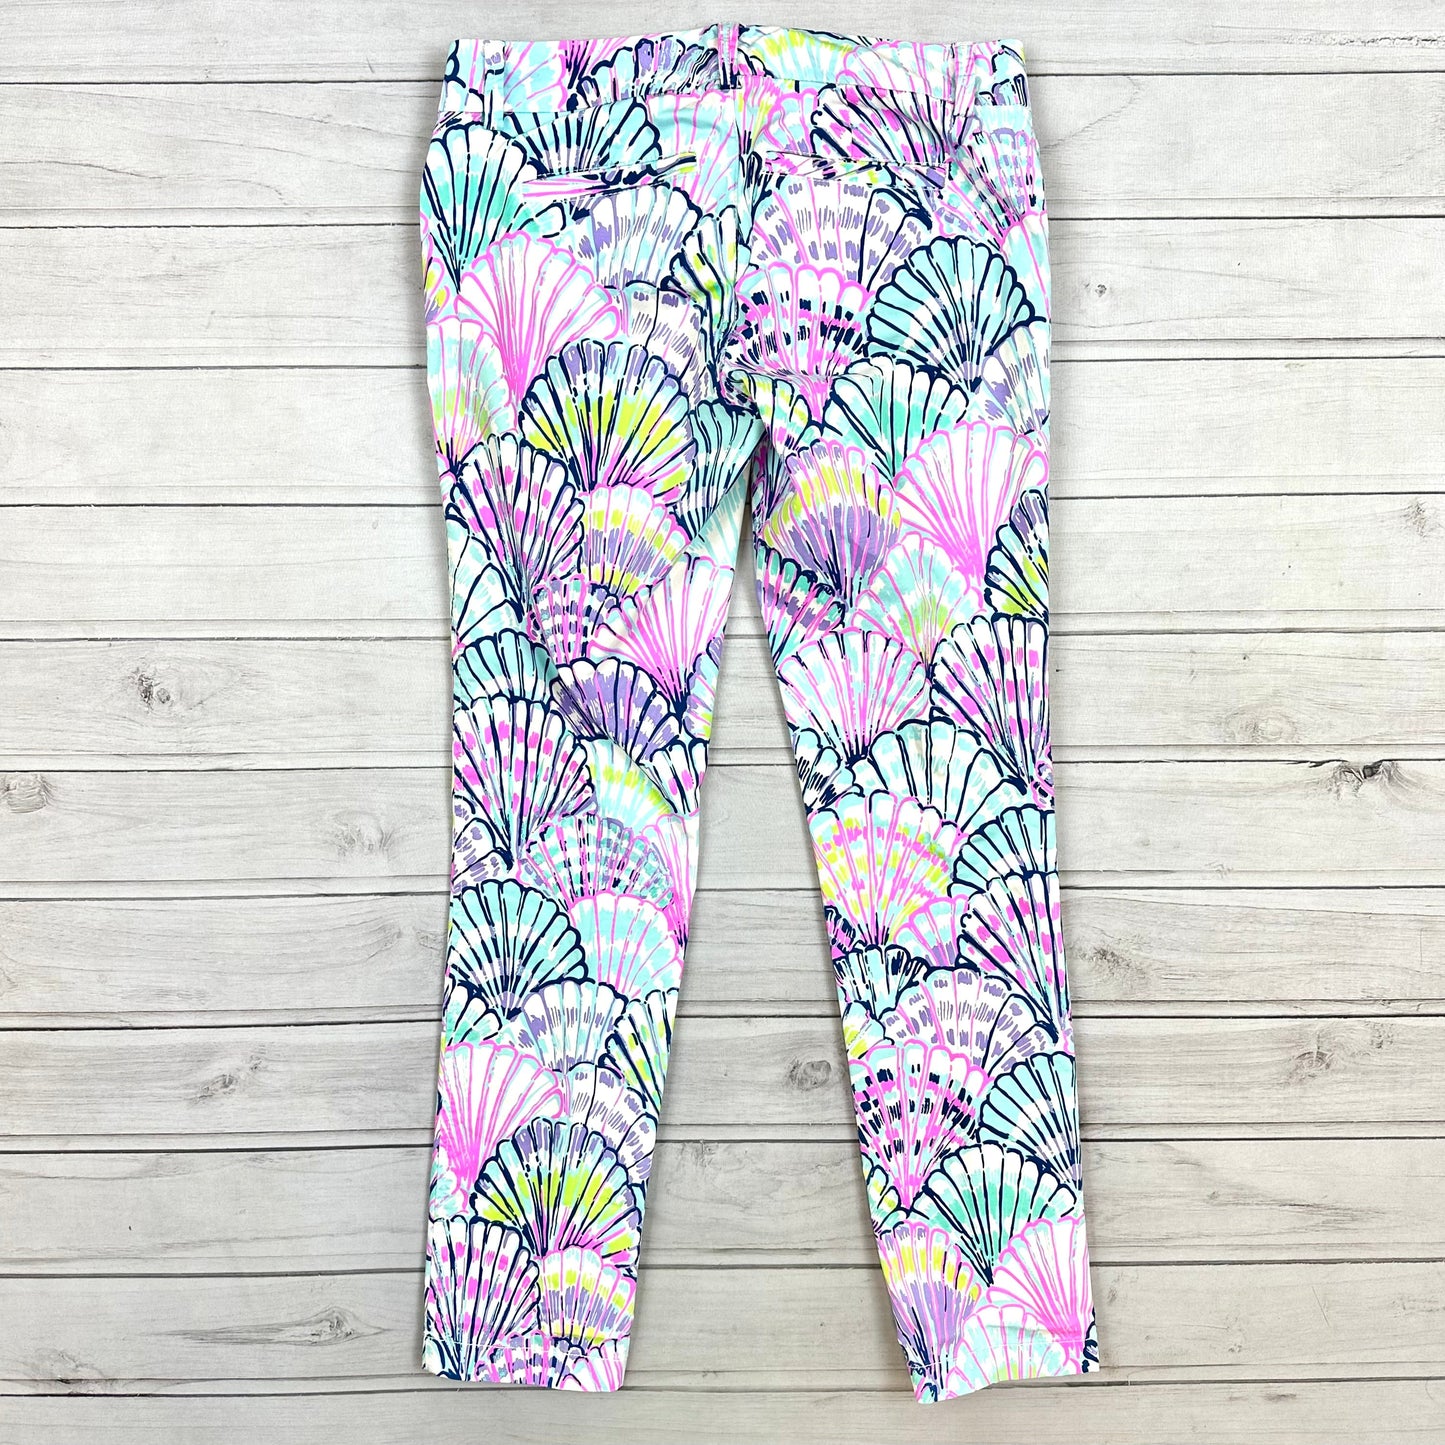 Pants Designer By Lilly Pulitzer  Size: 4